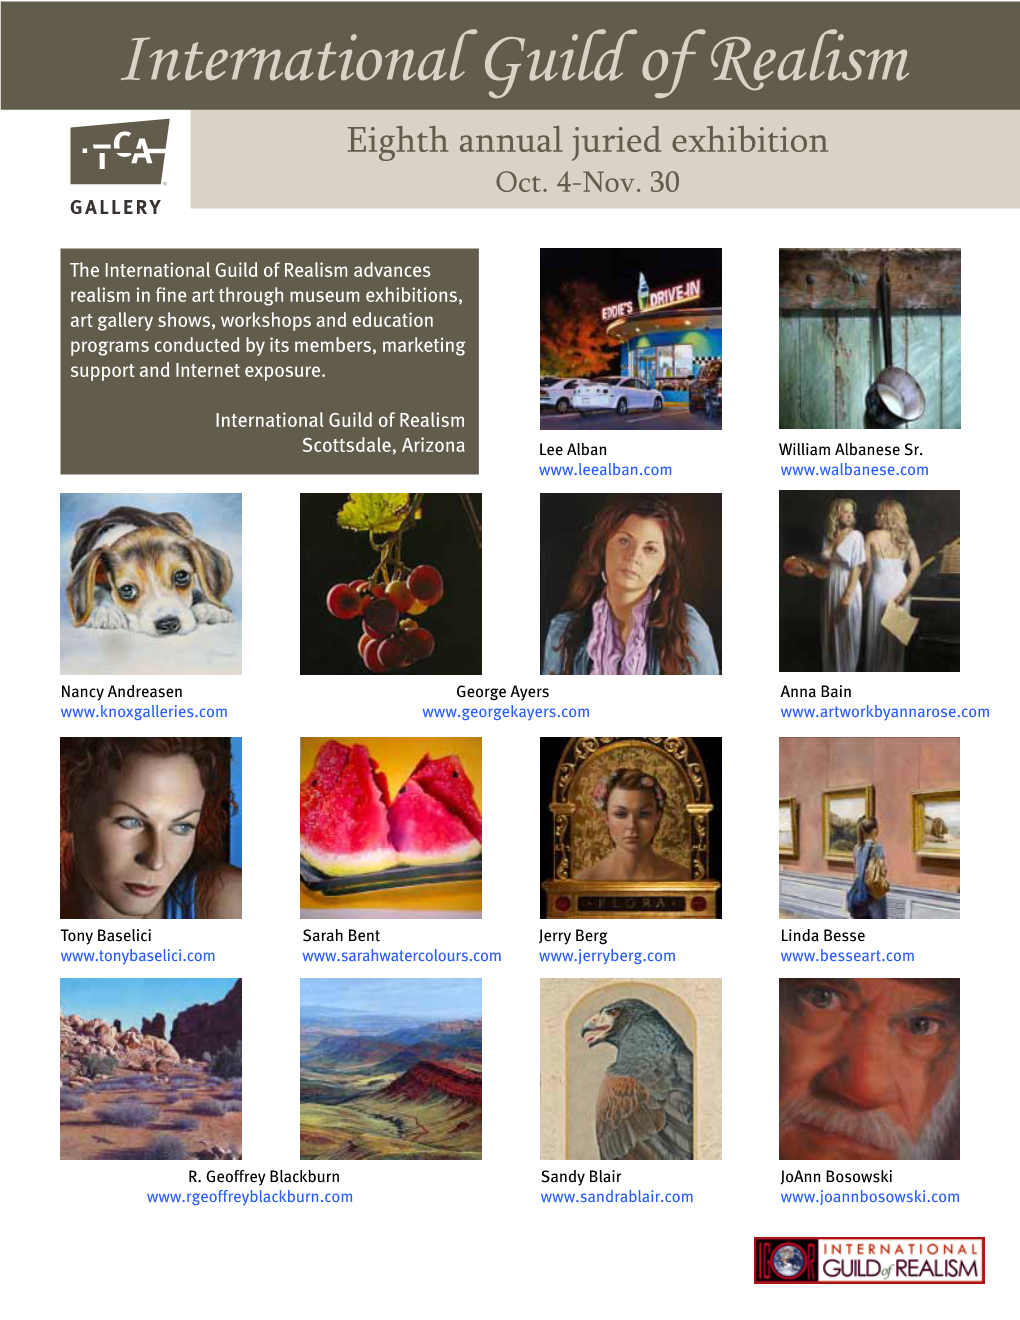 International Guild of Realism Eighth Annual Juried Exhibition ® Oct